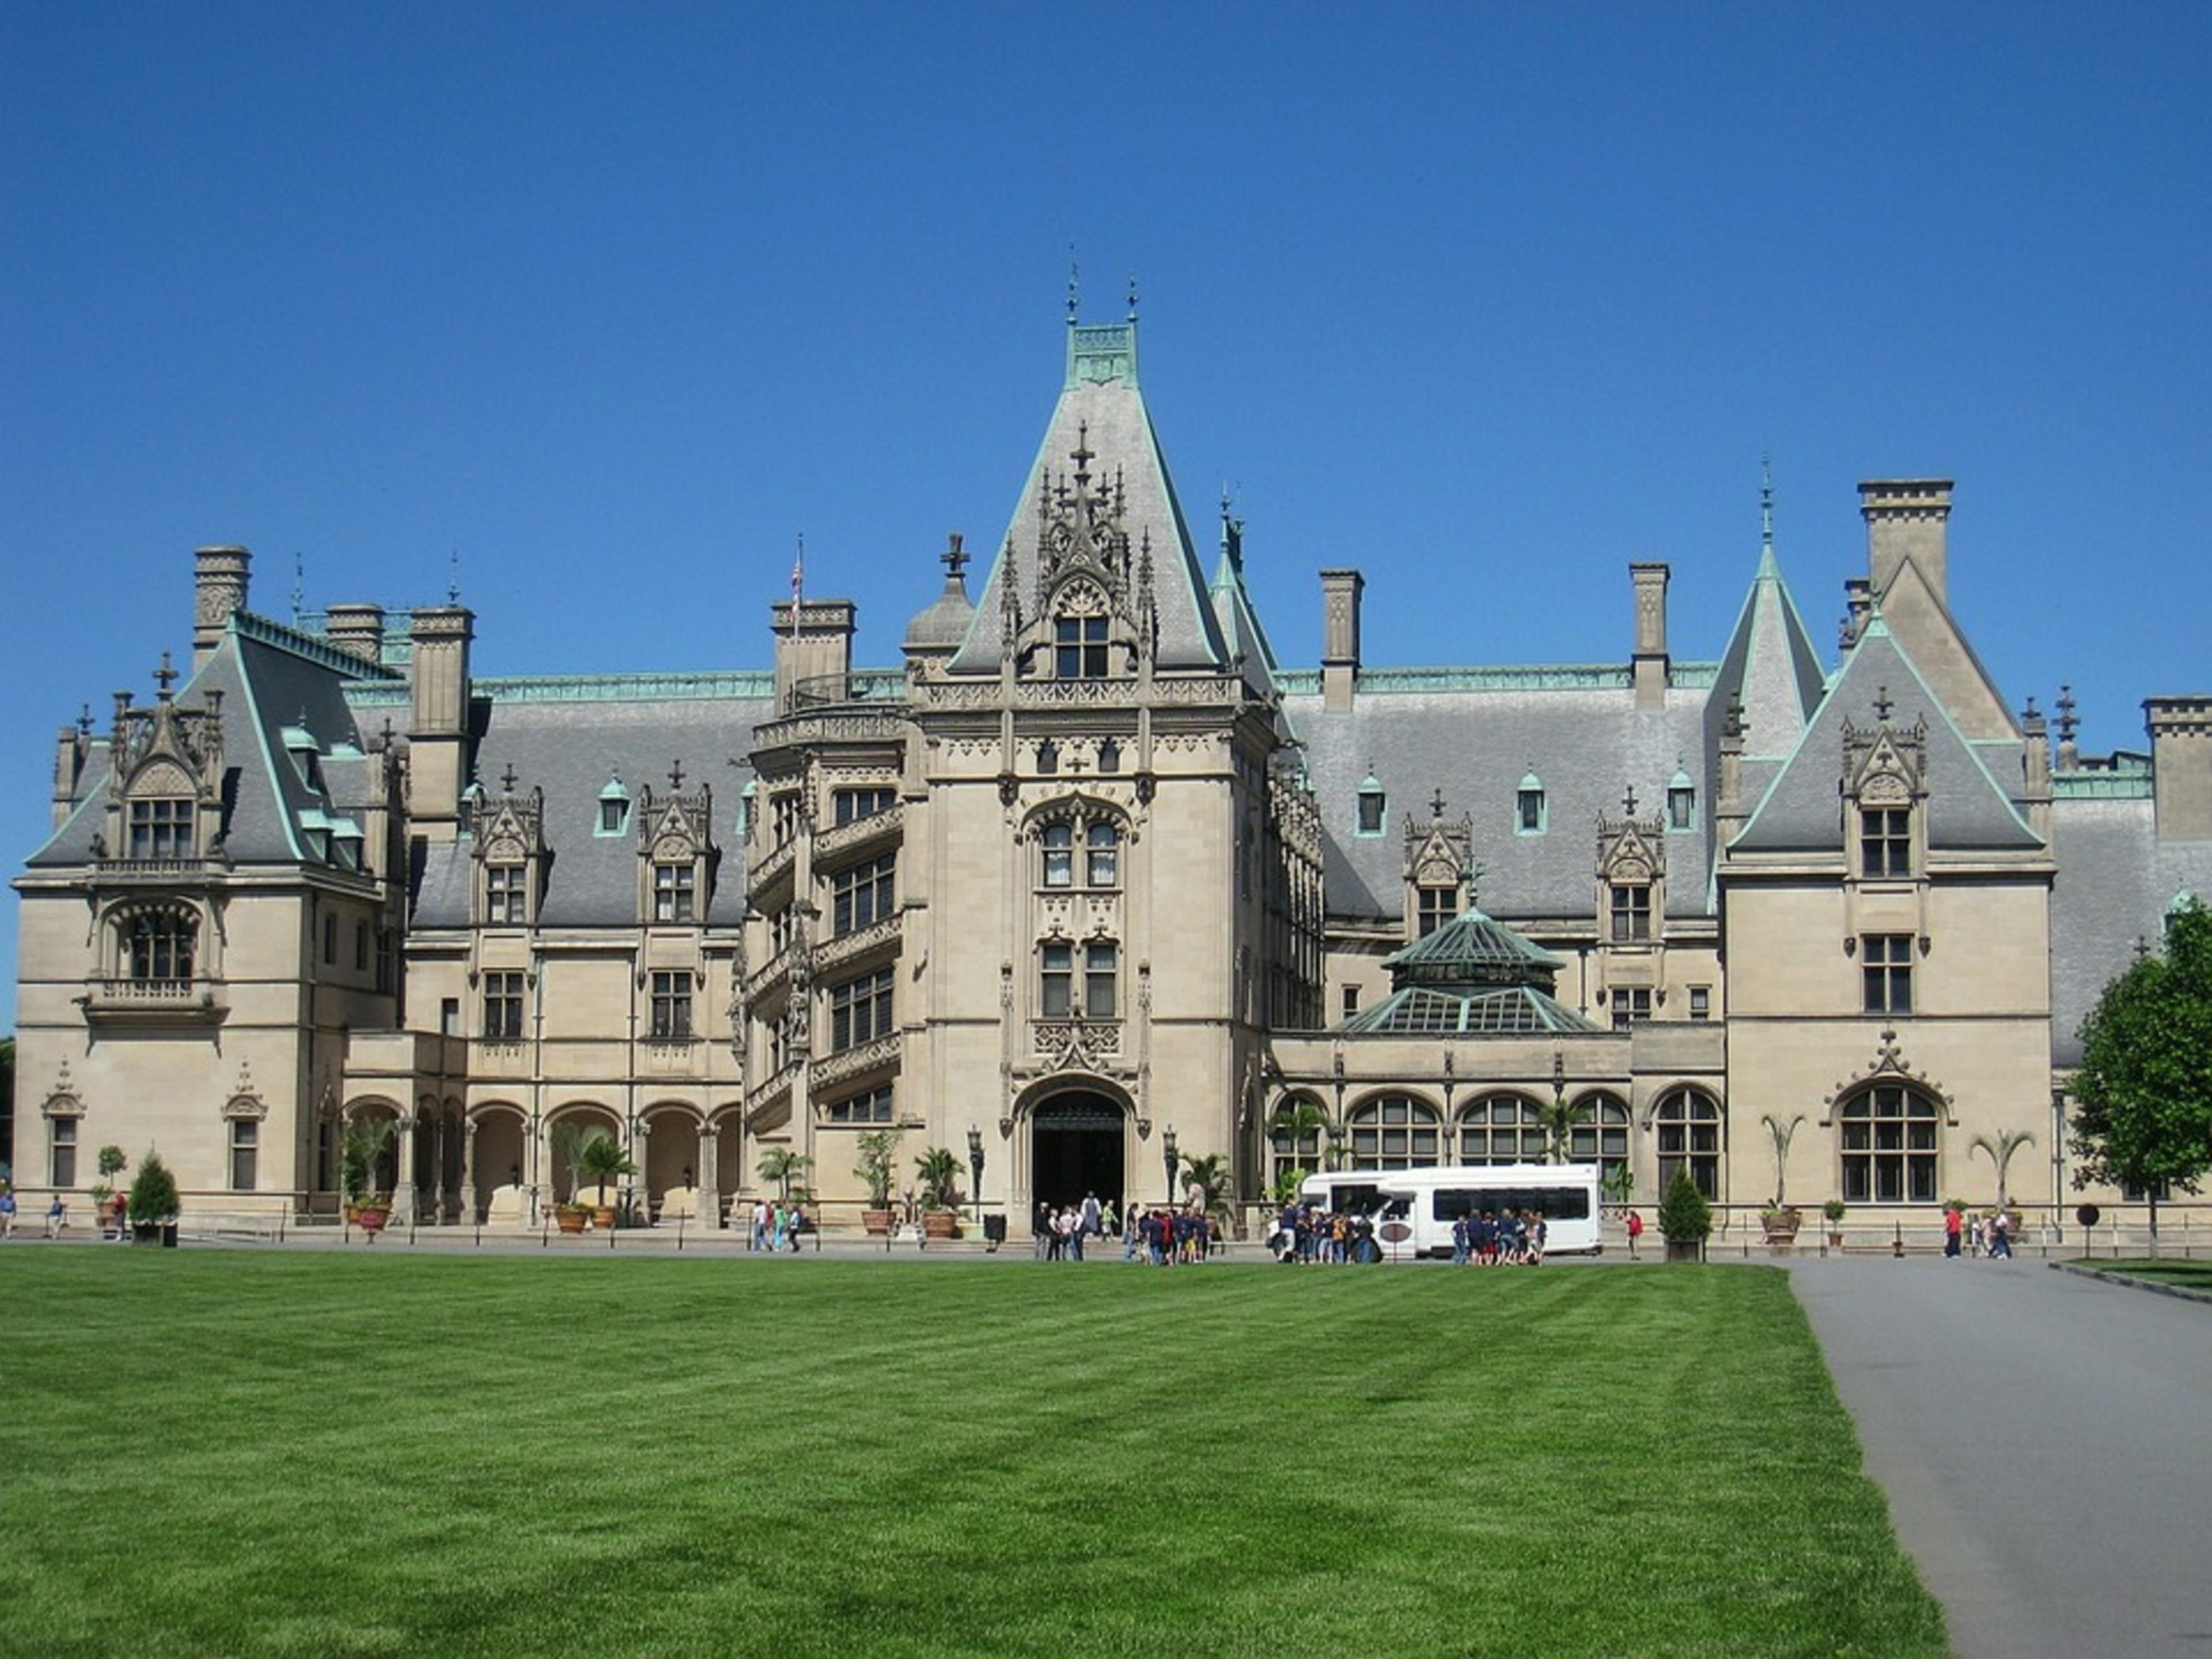 Visit America's largest Home.  Since 1895, Biltmore has had the natural beauty of the mountains and the majestic house and gardens to beguile us, inspire us, and allow us to escape from the everyday. 